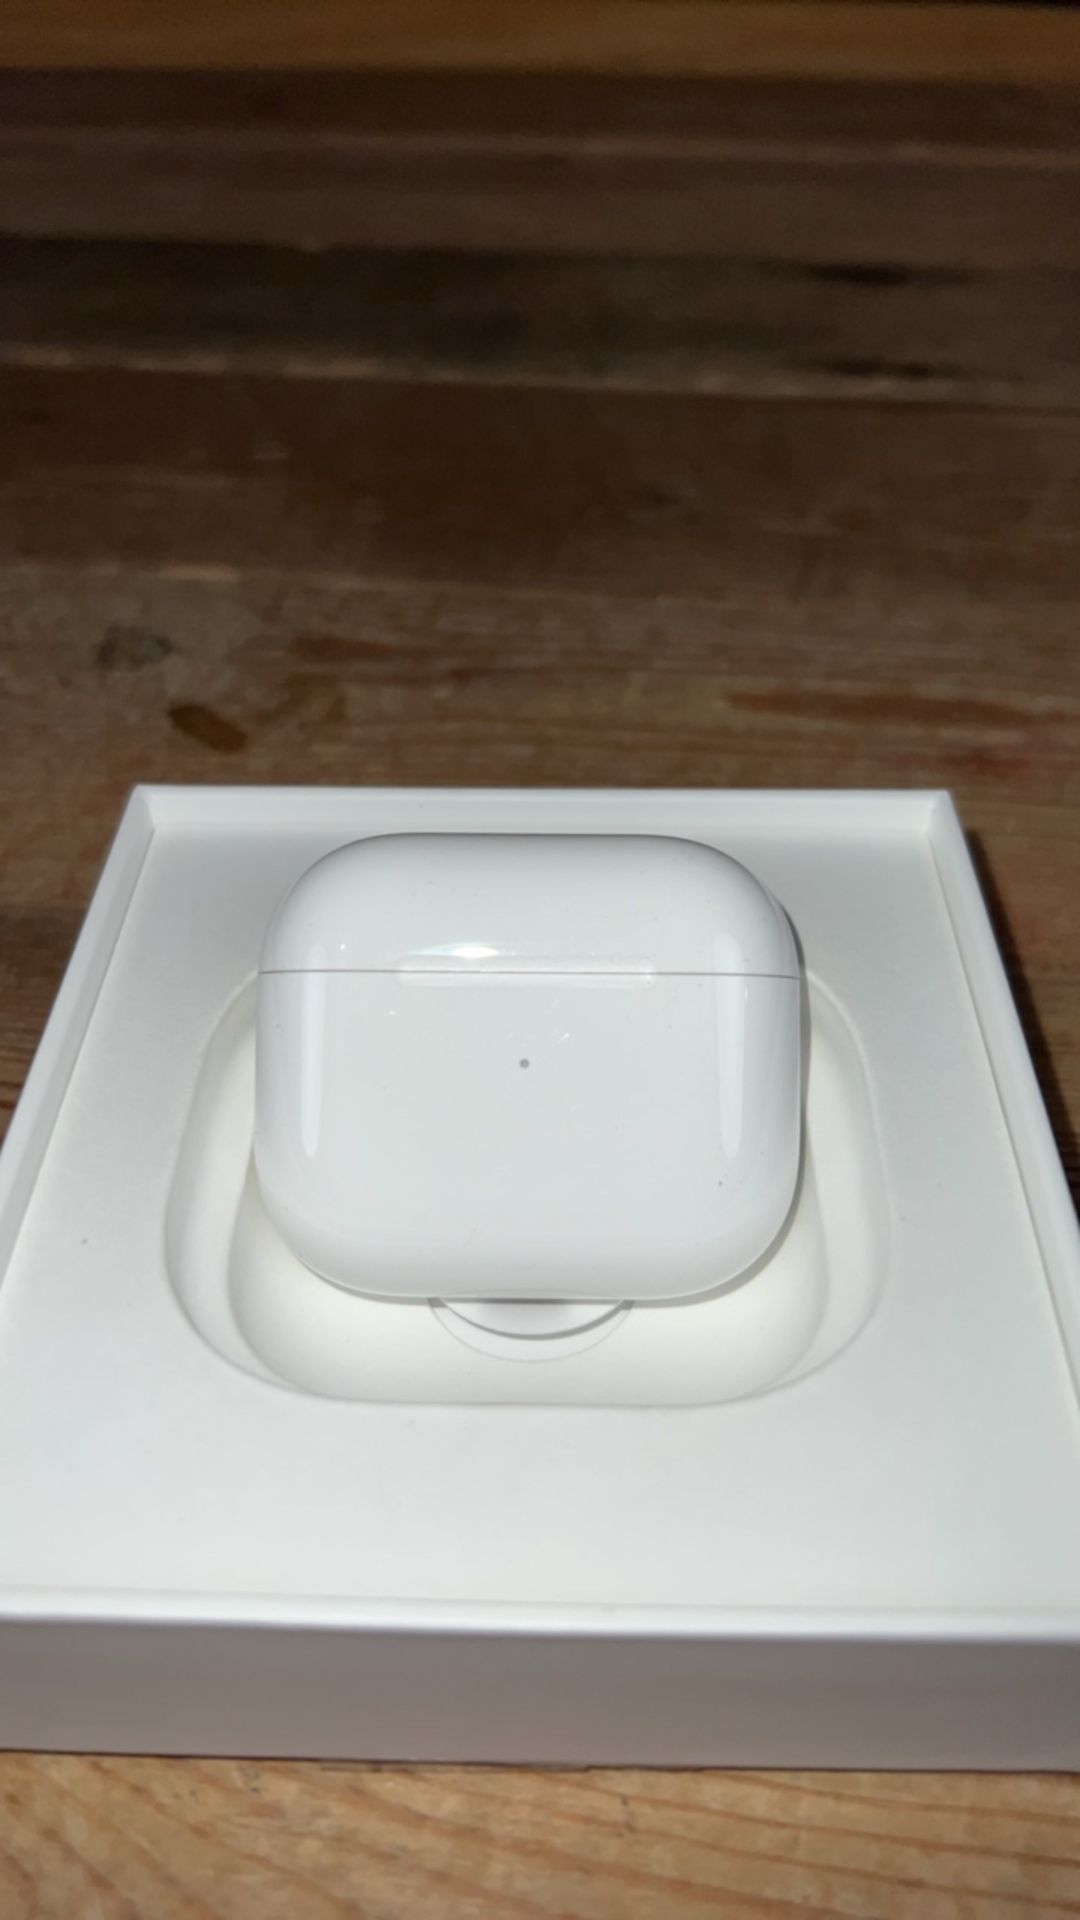 Apple Air Pods (3rd Generation) Charging Case Included - Image 3 of 5